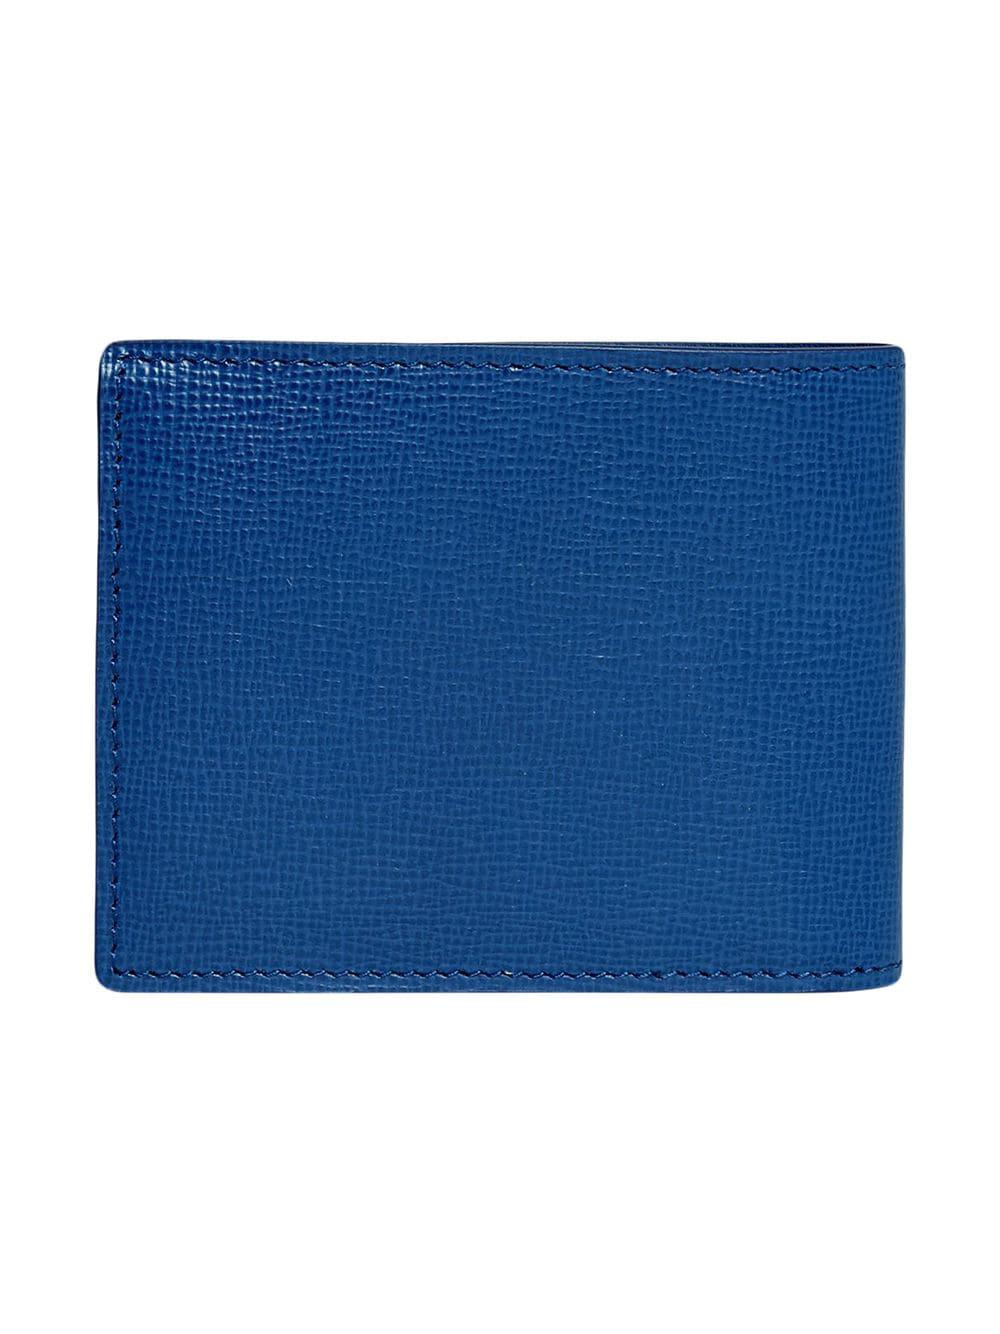 Burberry logo-lettering checked leather wallet, Blue